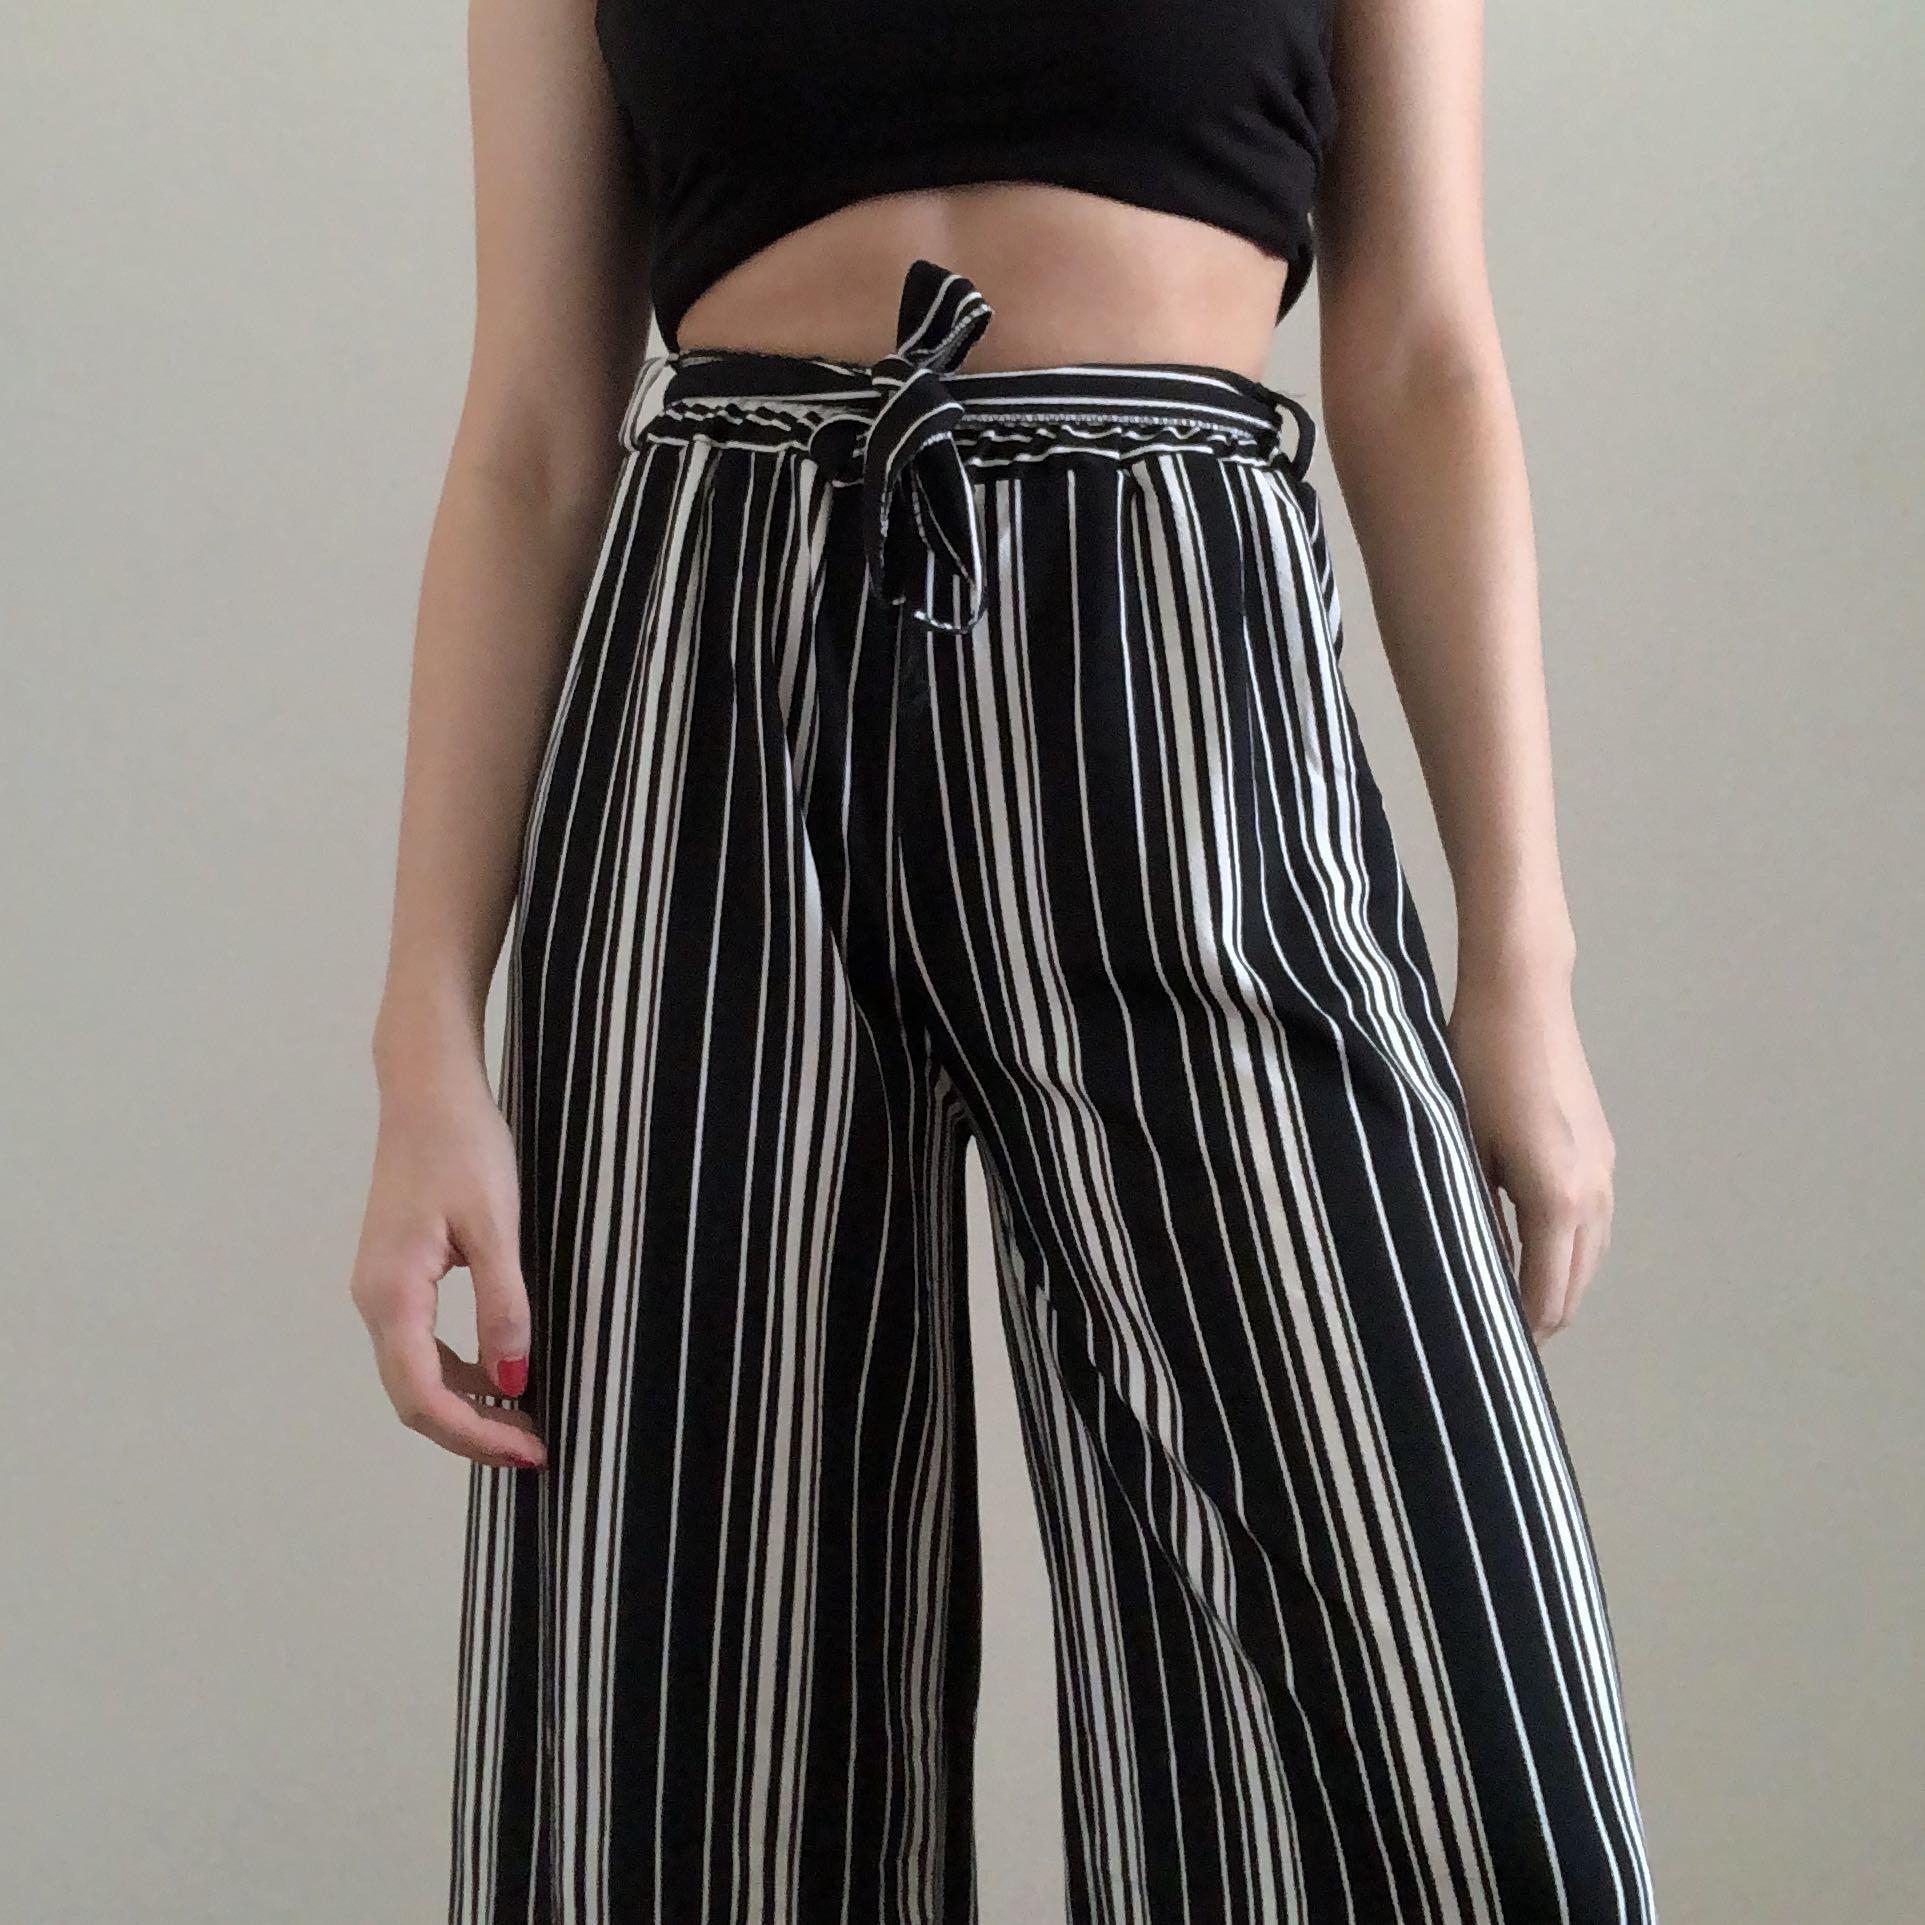 flowy black and white striped pants